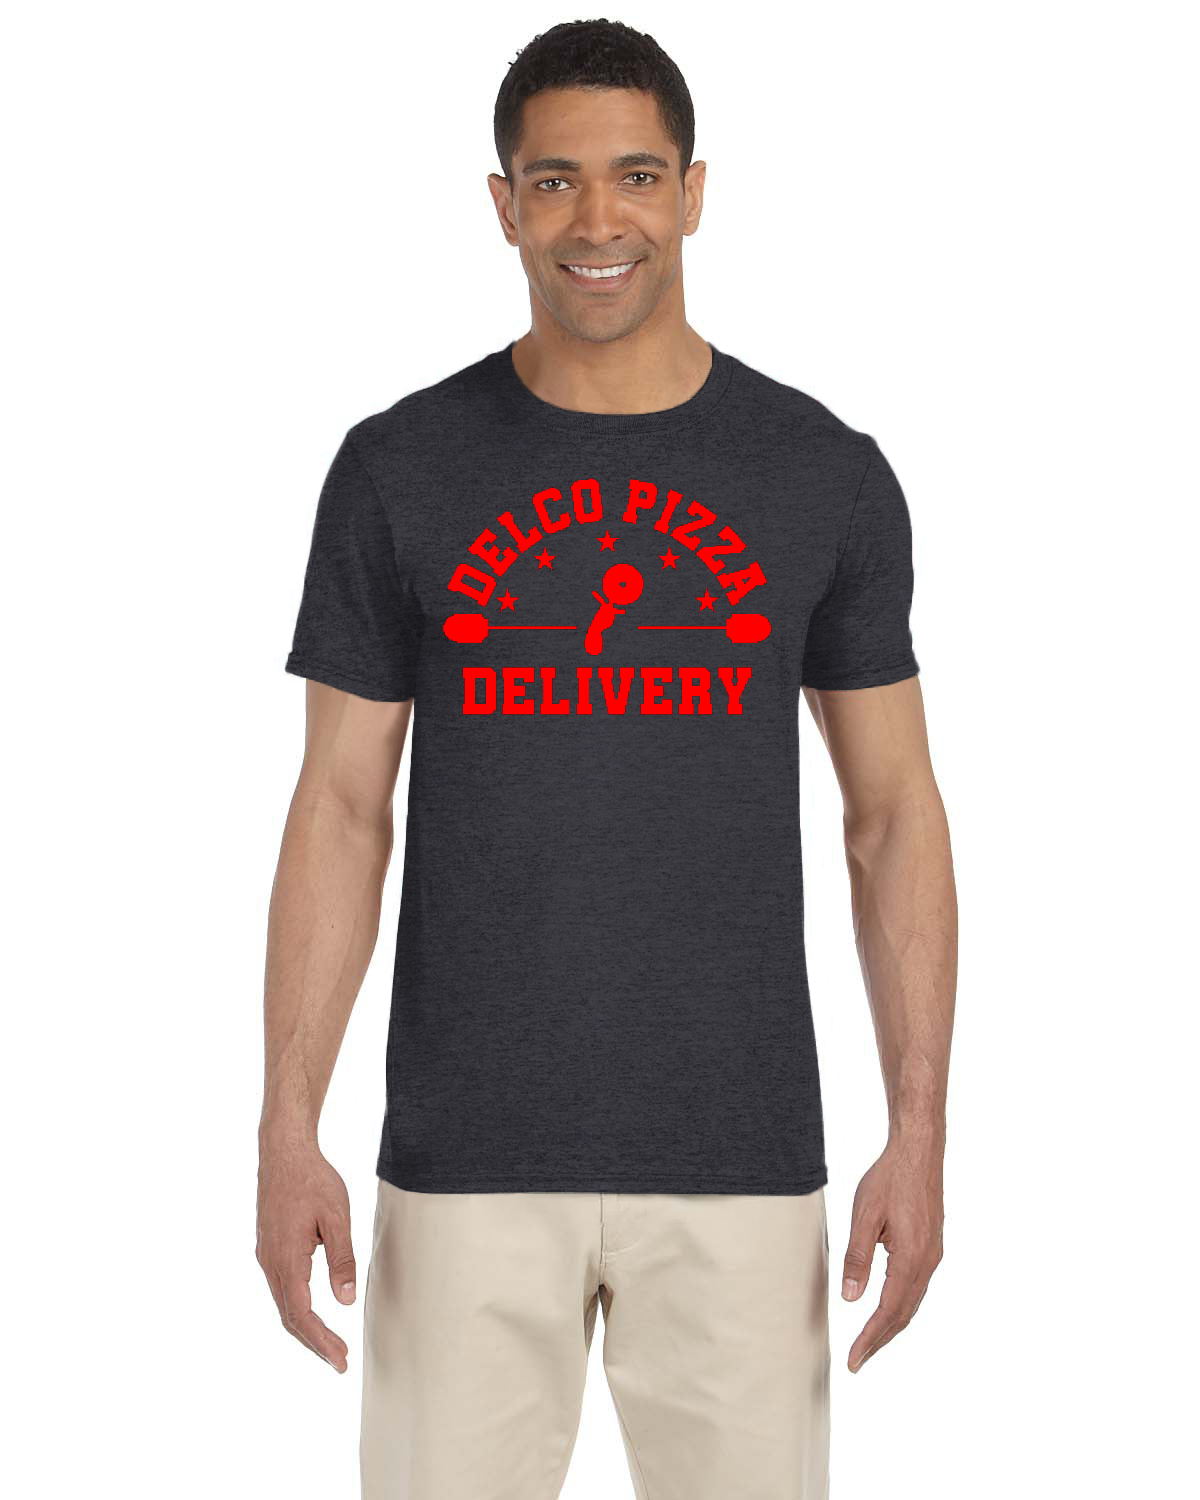 DELCO PIZZA DELIVERY Gildan Adult Softstyle 7.5 oz./lin. yd. T-Shirt | G640